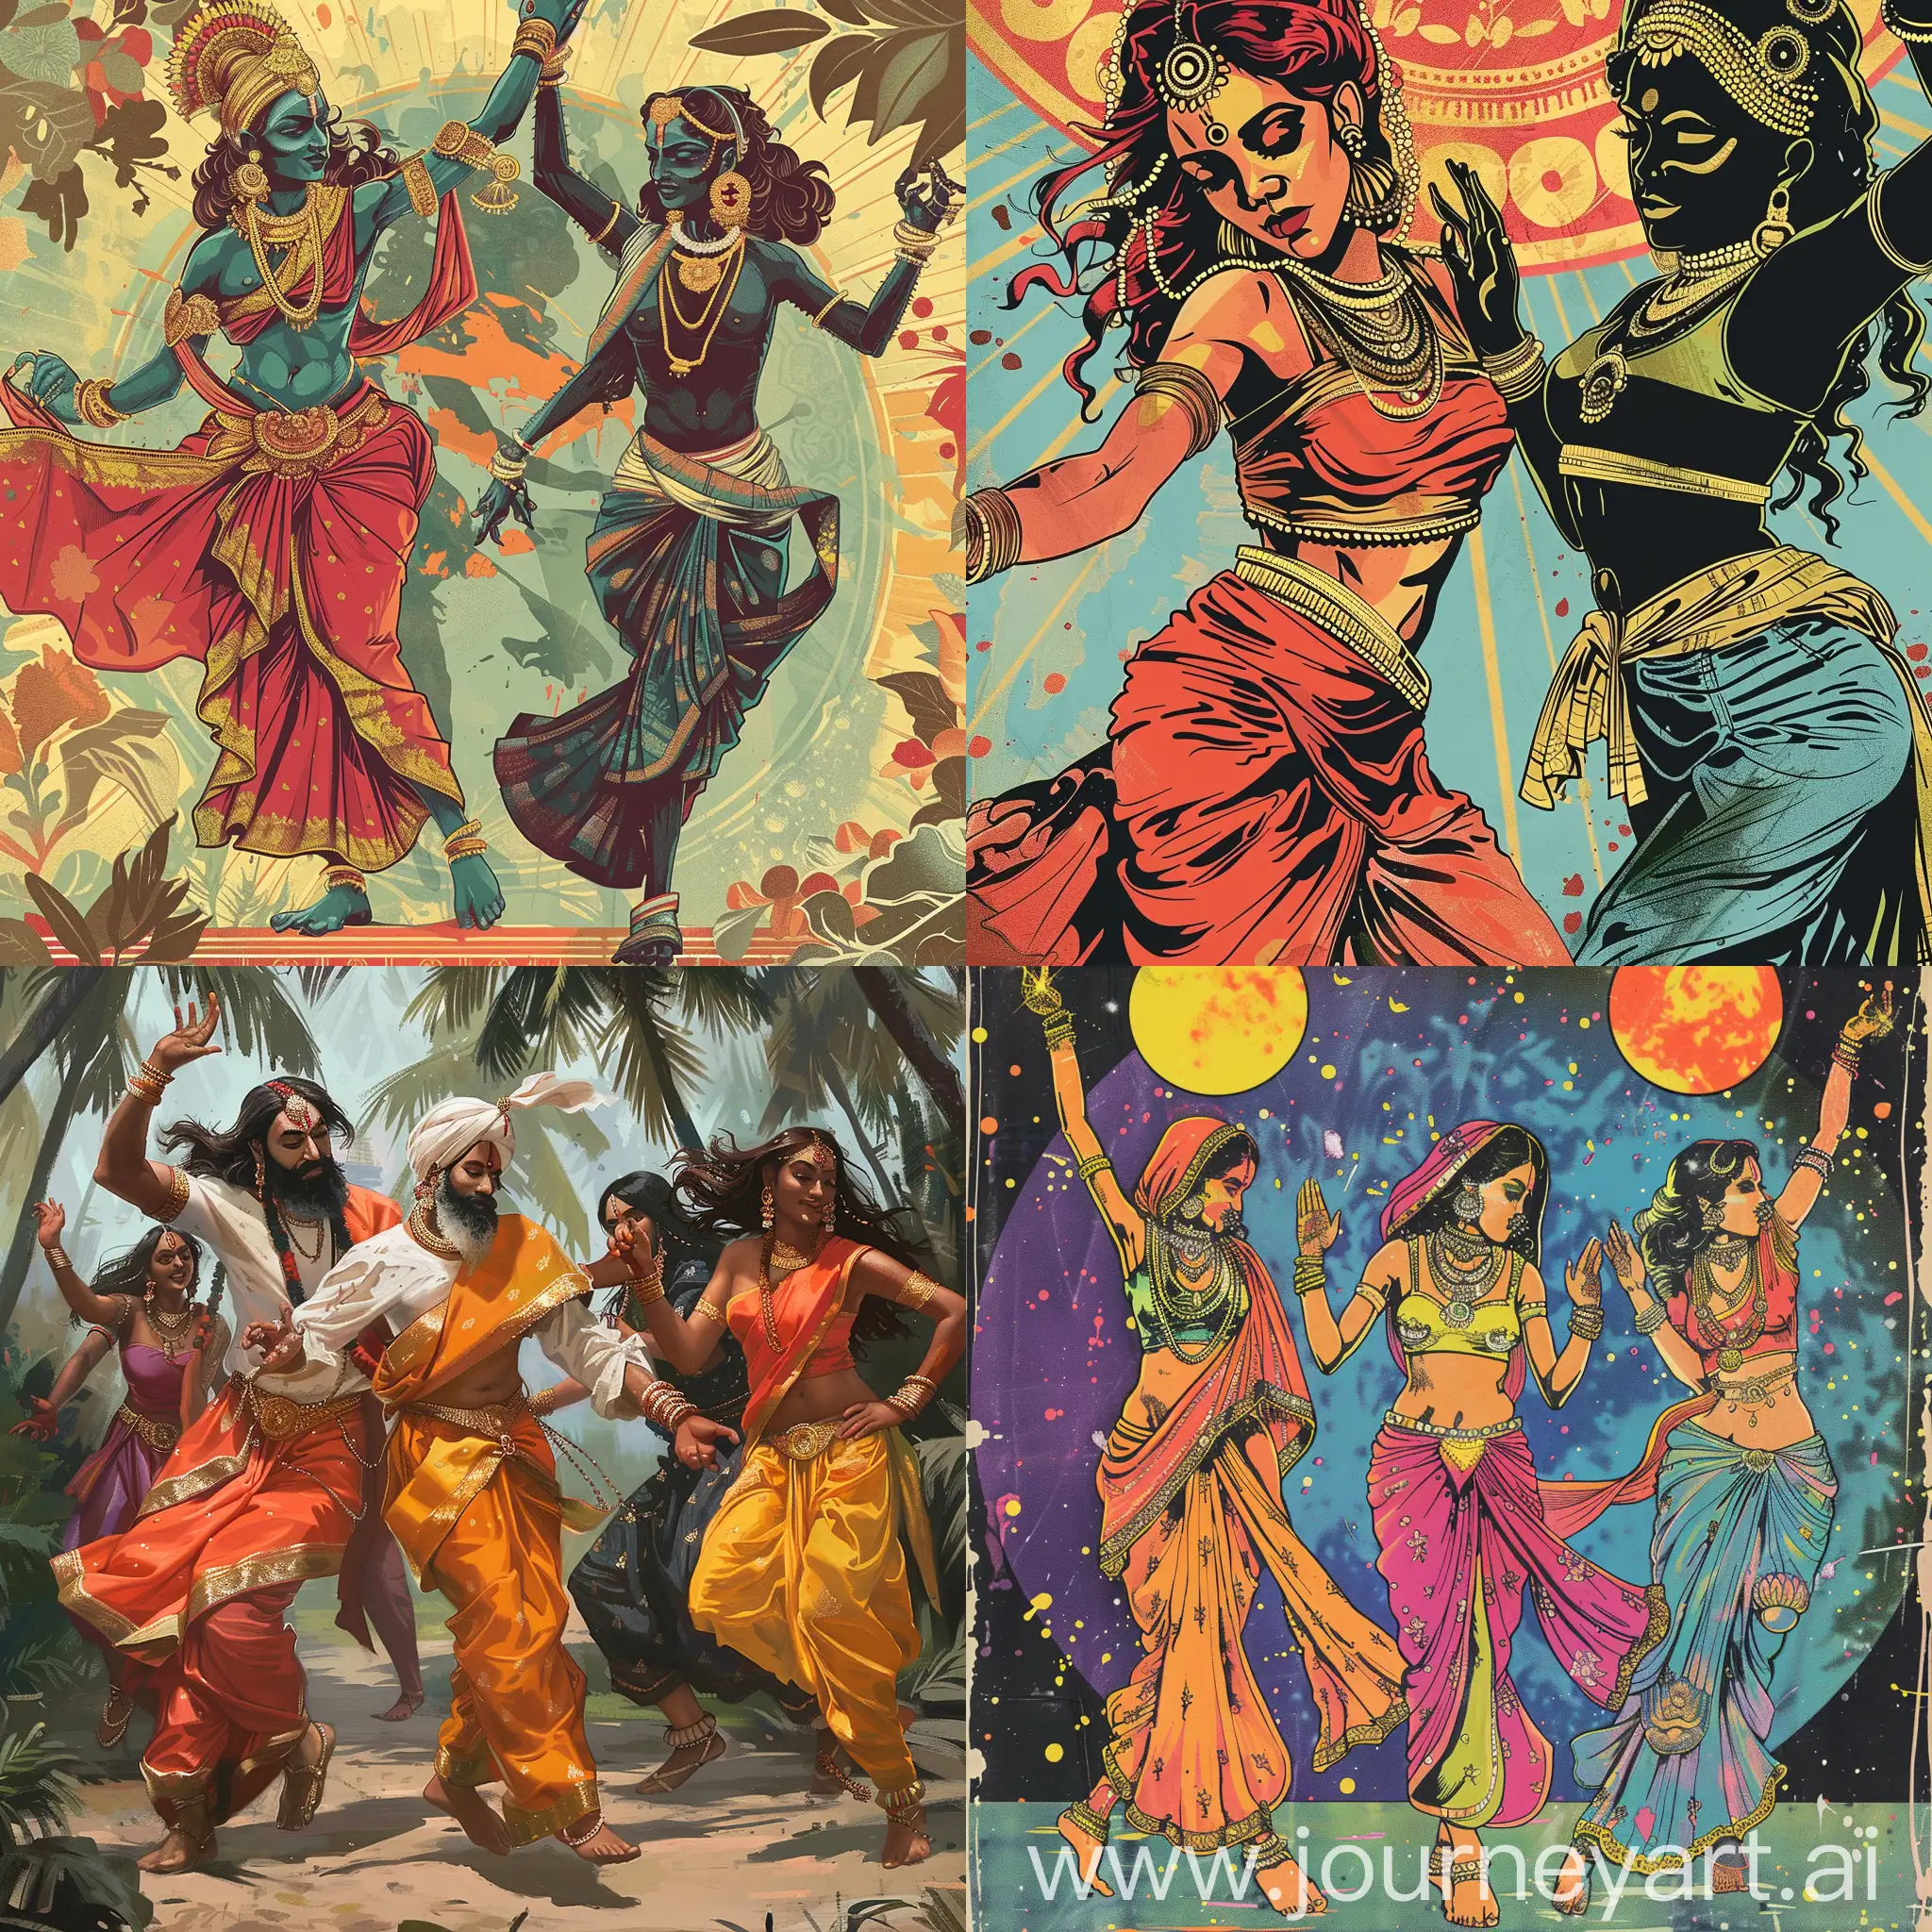 Indian-Gods-Dancing-in-Fashionable-Attire-at-the-Disco-Deep-House-Music-Album-Cover